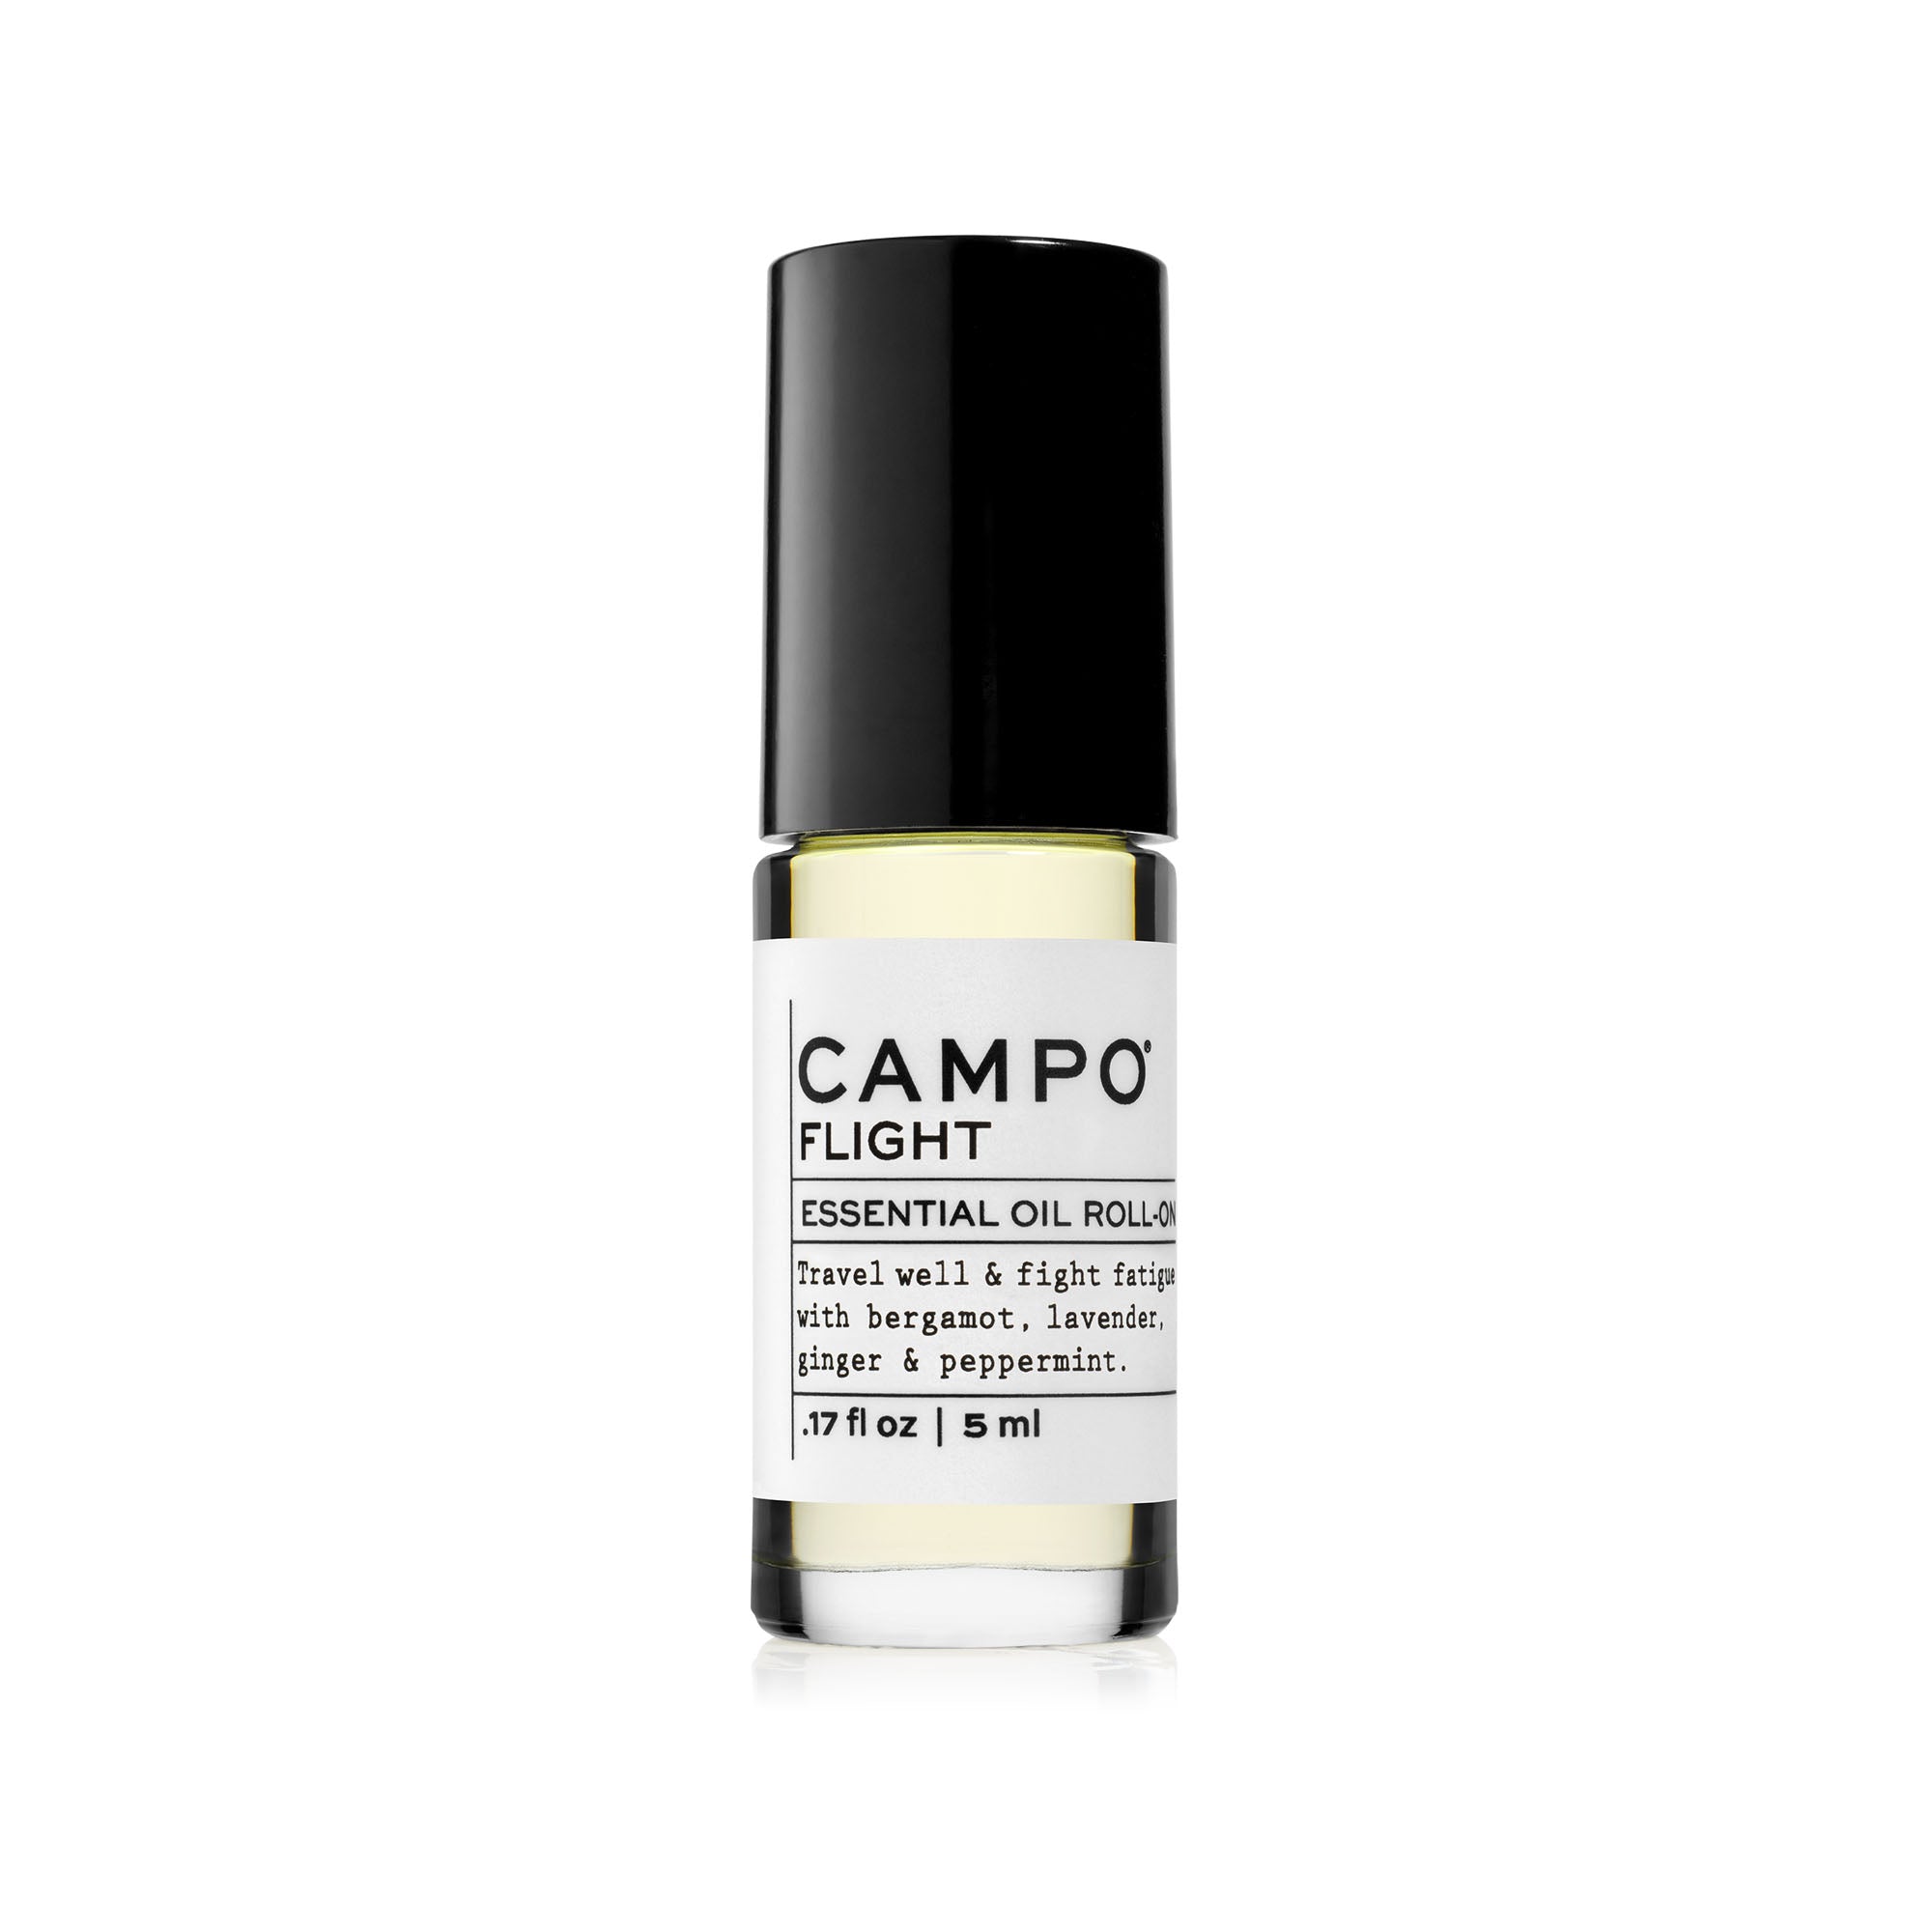 Campo Beauty Essential Oil FLIGHT Blend Roll-On that in 5 ml. Dispels feelings of stress during flight and restores a sense of vitality and alertness in any time zone. Feel grounded and connected to your mind and body with this 100% pure essential oil roll-on blend of Bergamot, Lavender, Peppermint & Ginger. Pre-blended with 100% natural beauty carrier oils, so it’s jet-set and ready to roll.